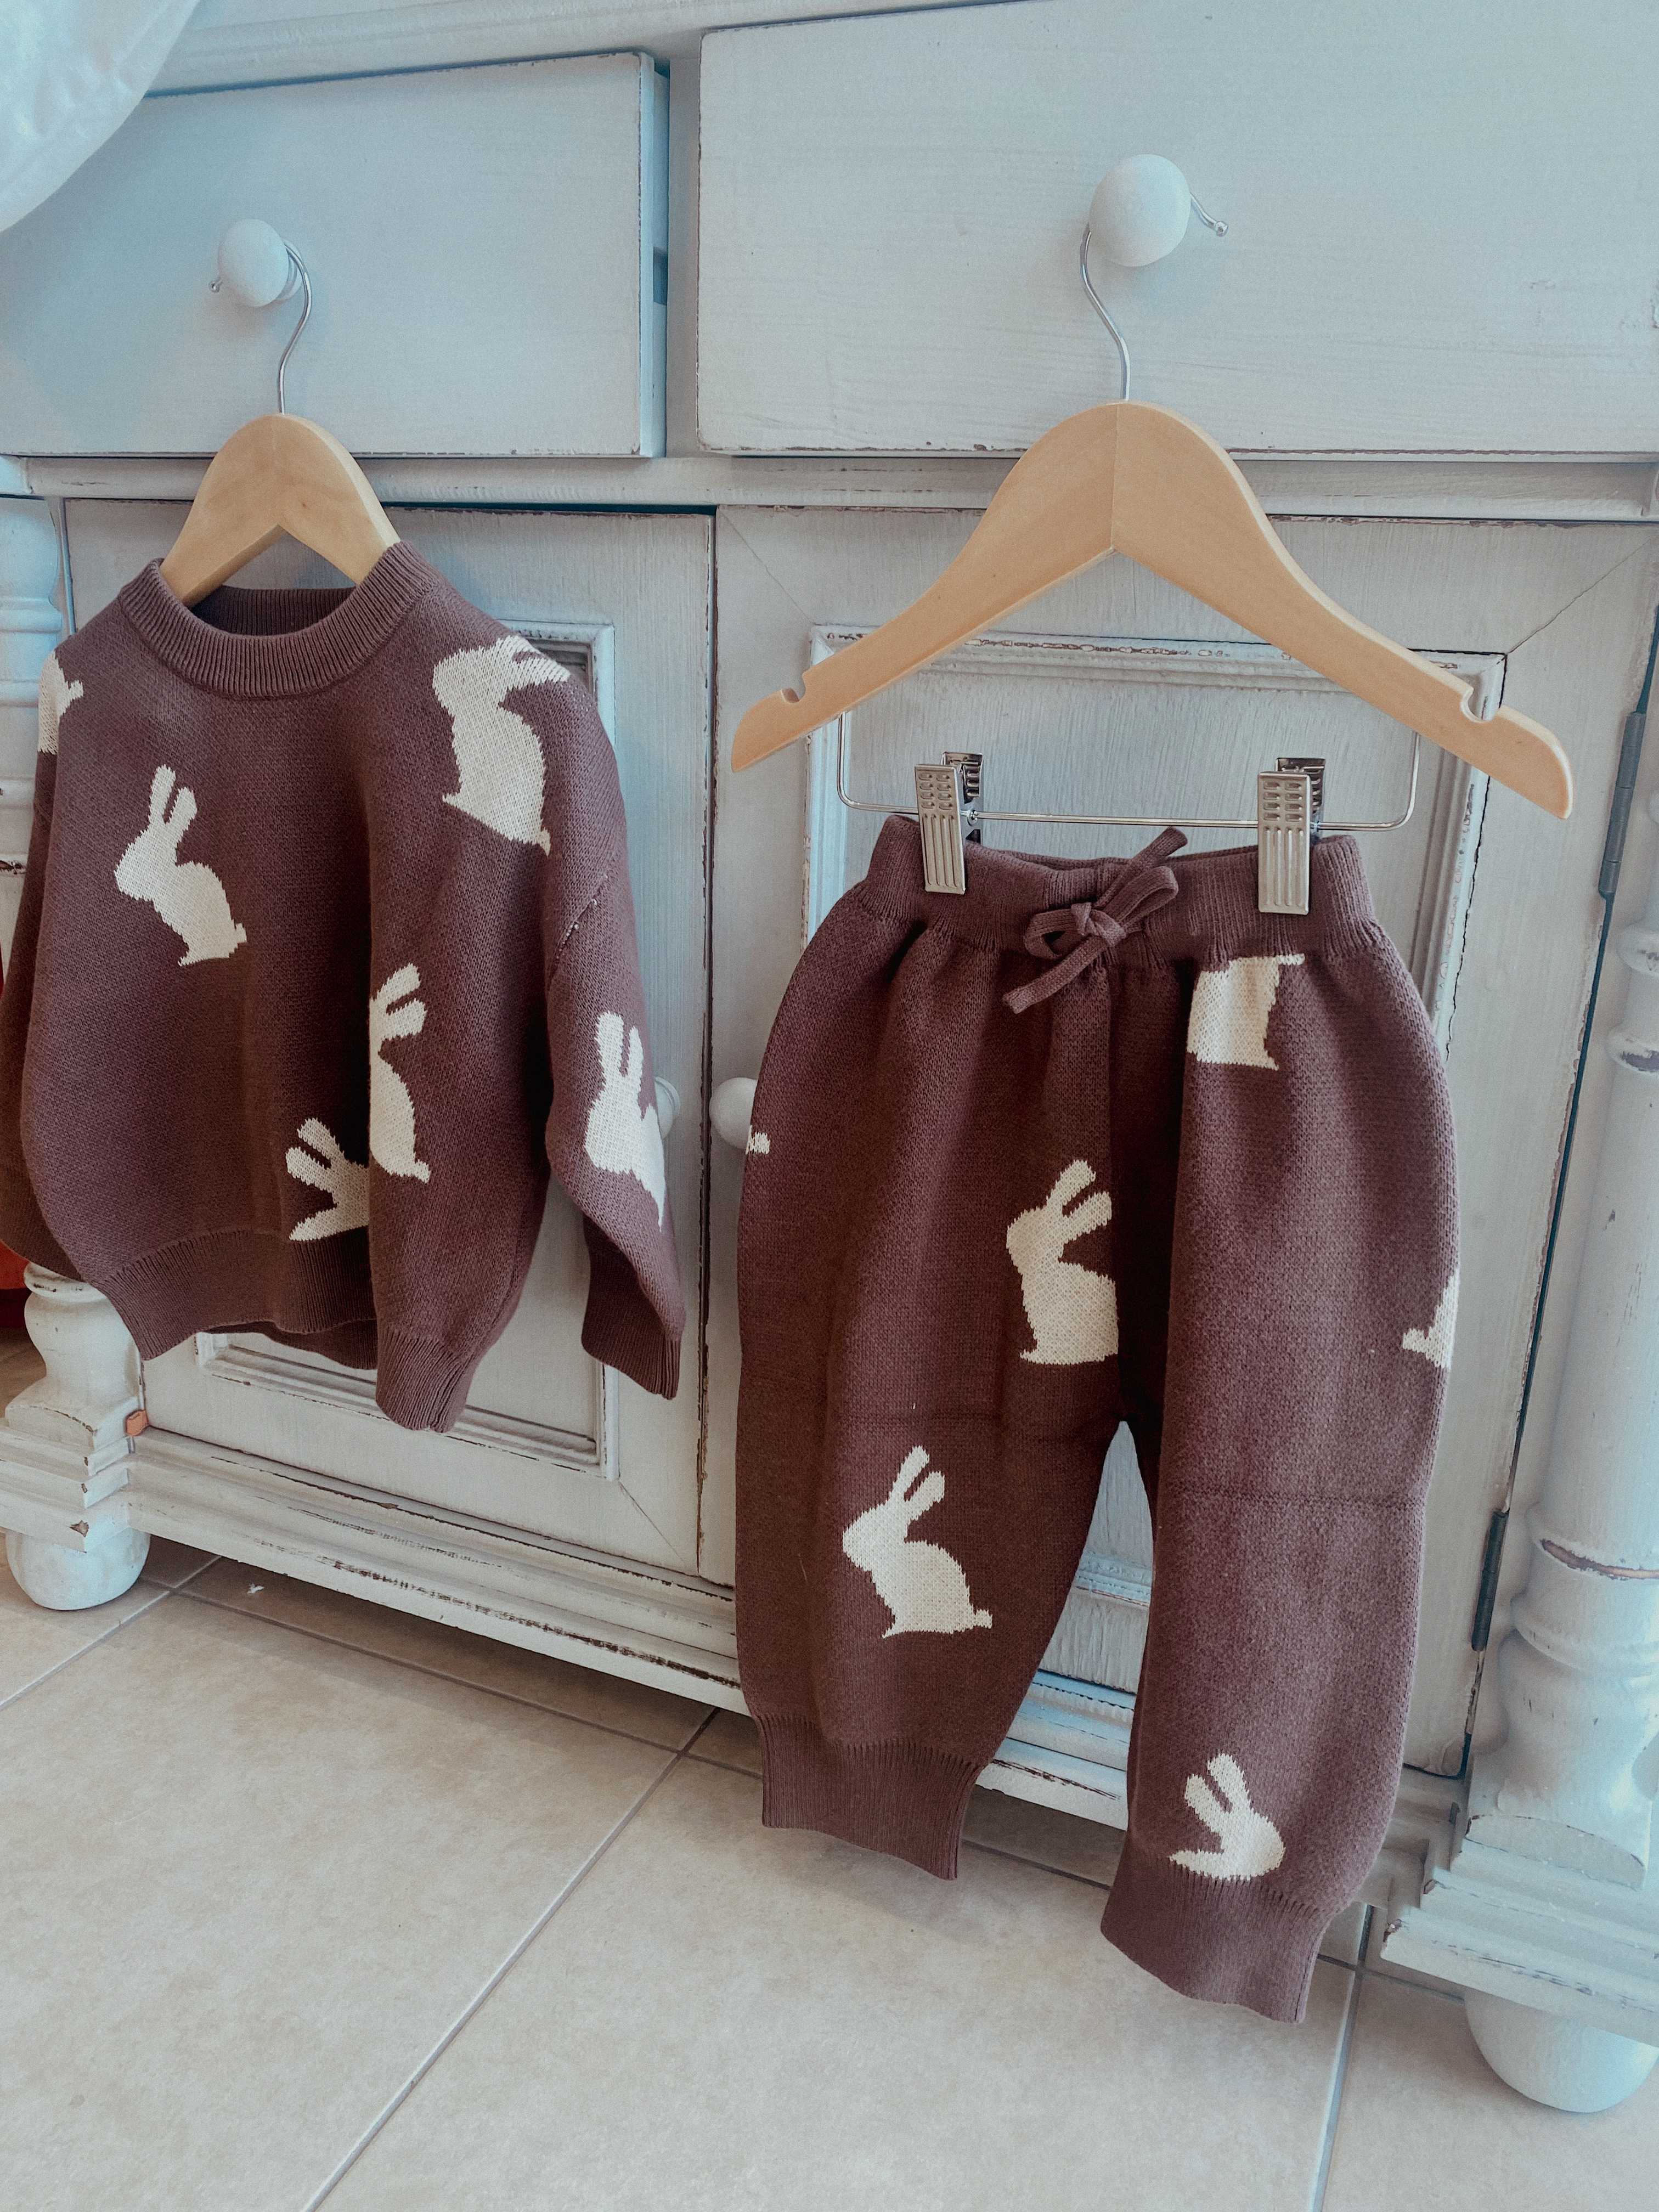 a children's knitted set of jumper and pants is hanging from wooden hangers. The set is knitted jacquard and is brown with cream bunny print on it. The jumper and jogging pants with tie-string waist are hanging from the drawers of a vintage piece of furniture.